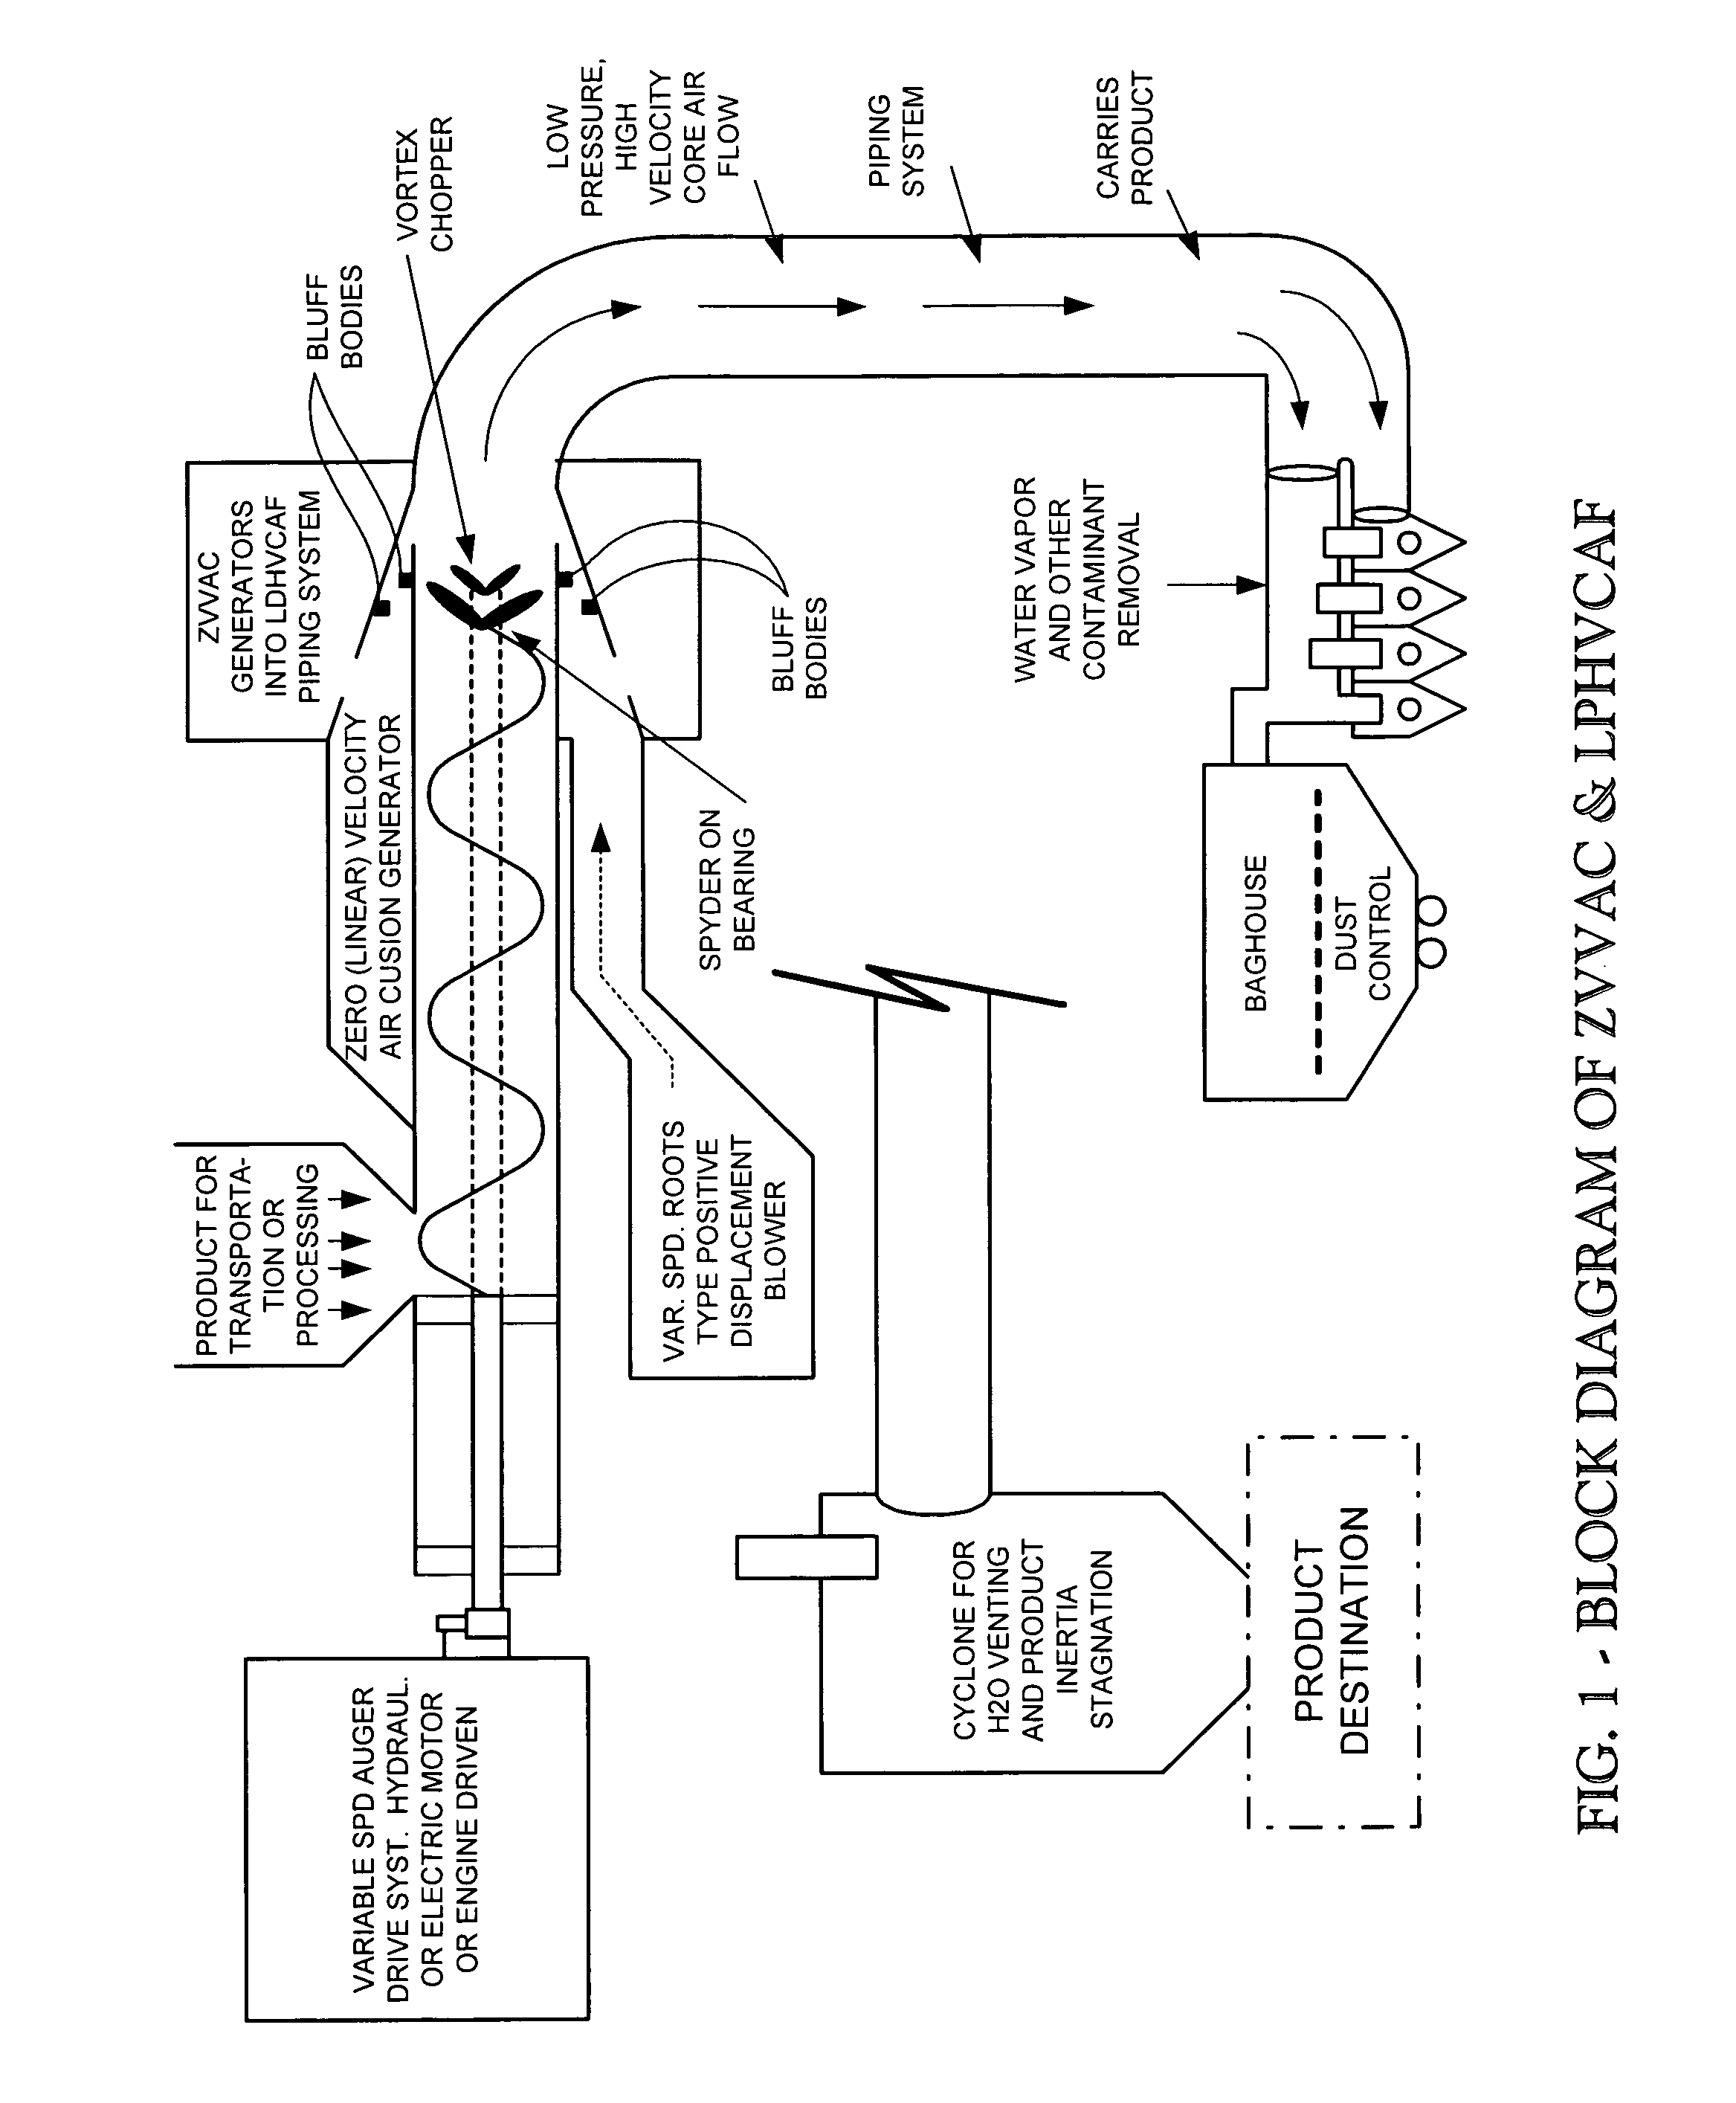 Low-pressure, air-based, particulate materials transfer apparatus and method